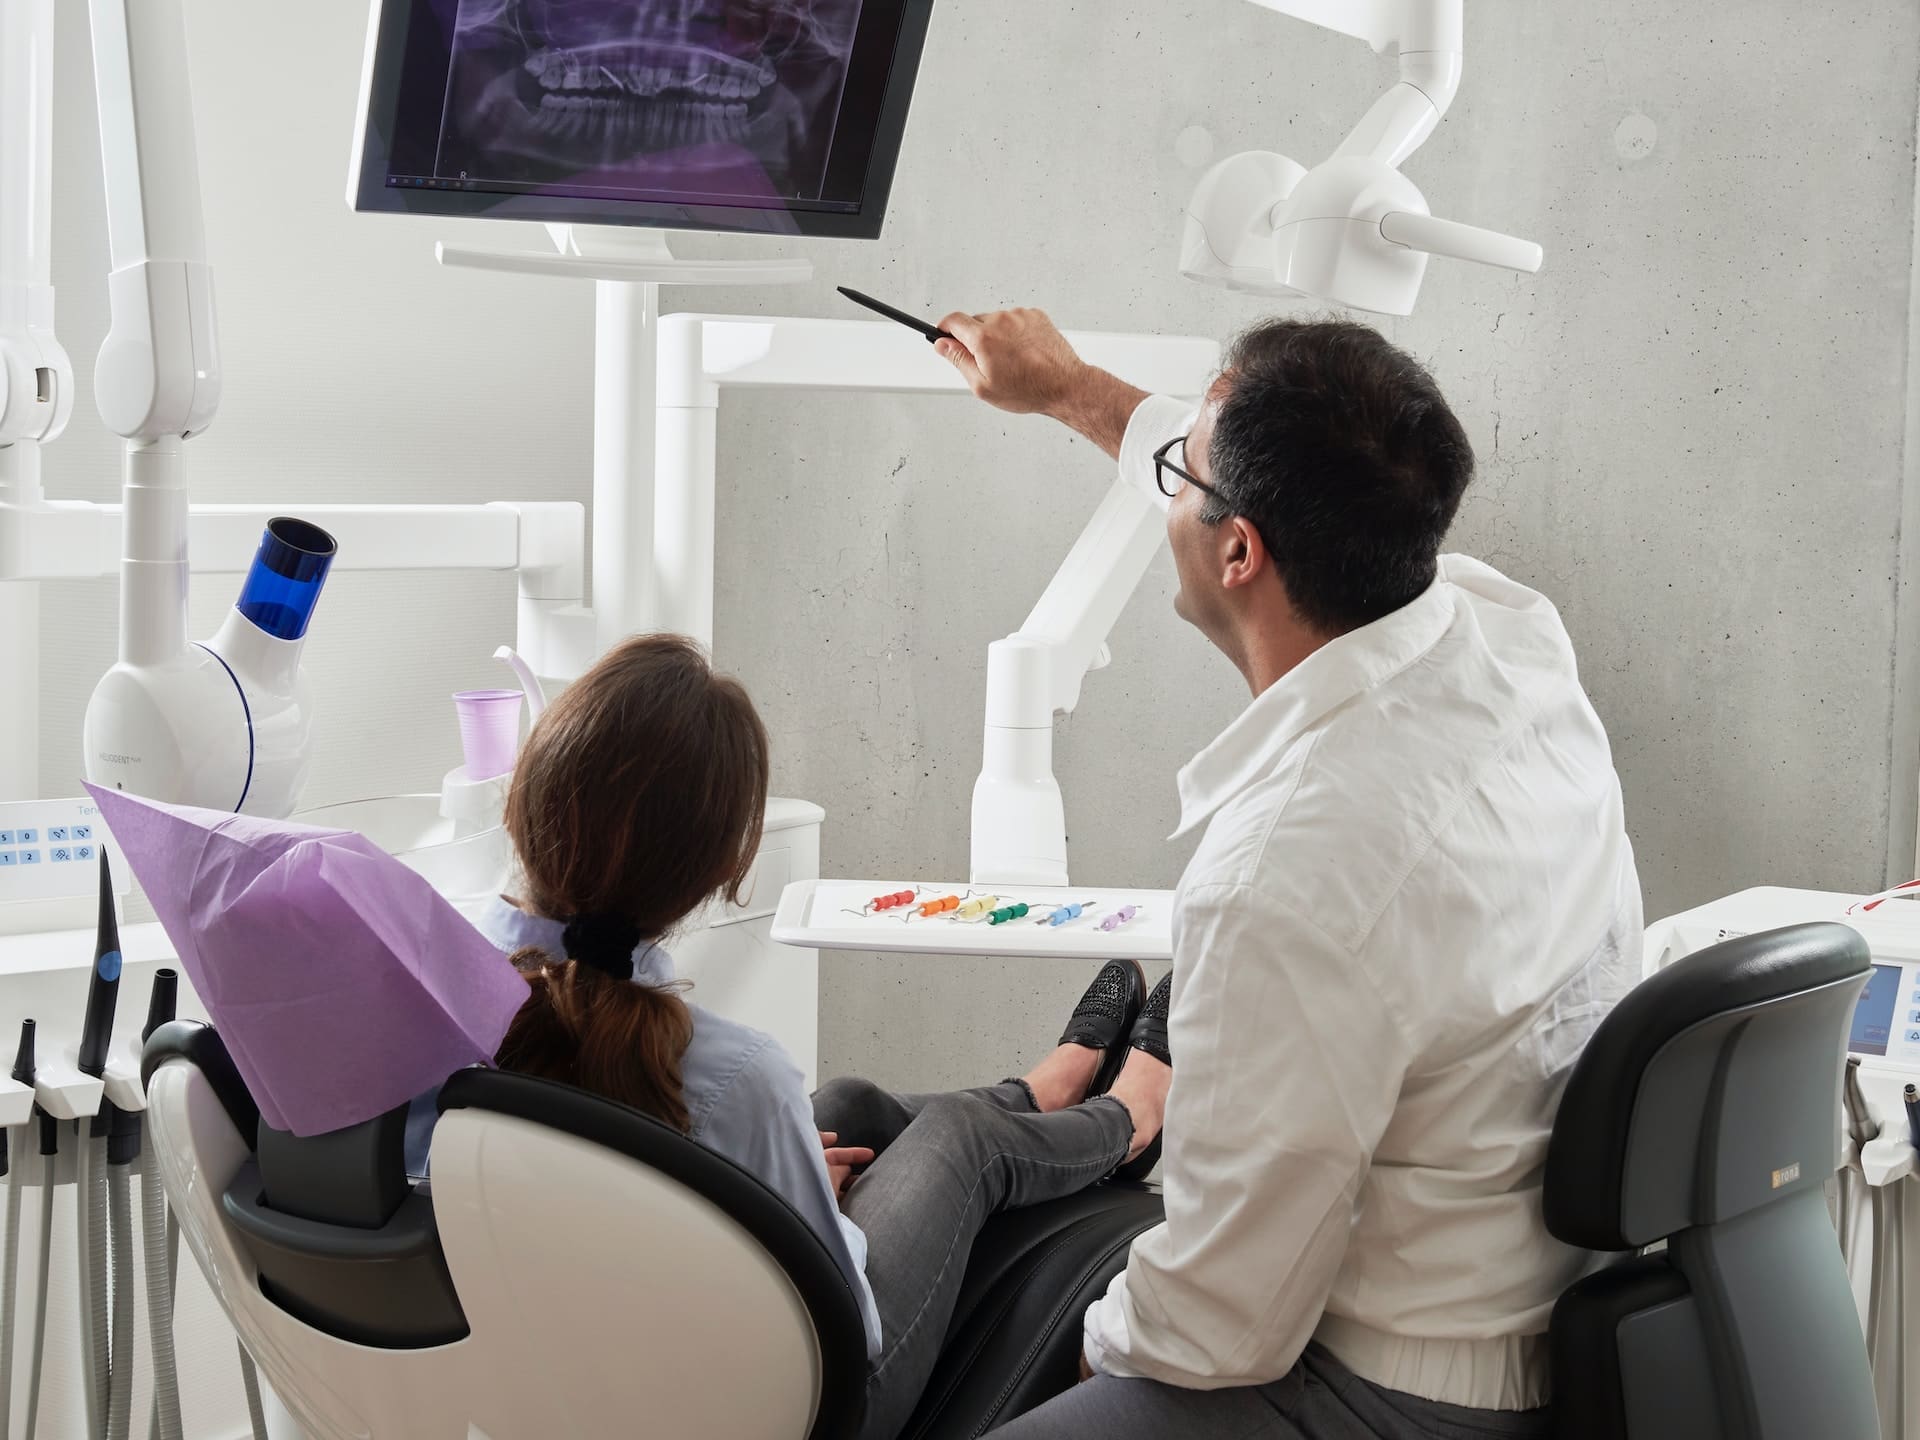 Dentist displaying treatment results to patient on medical monitor.